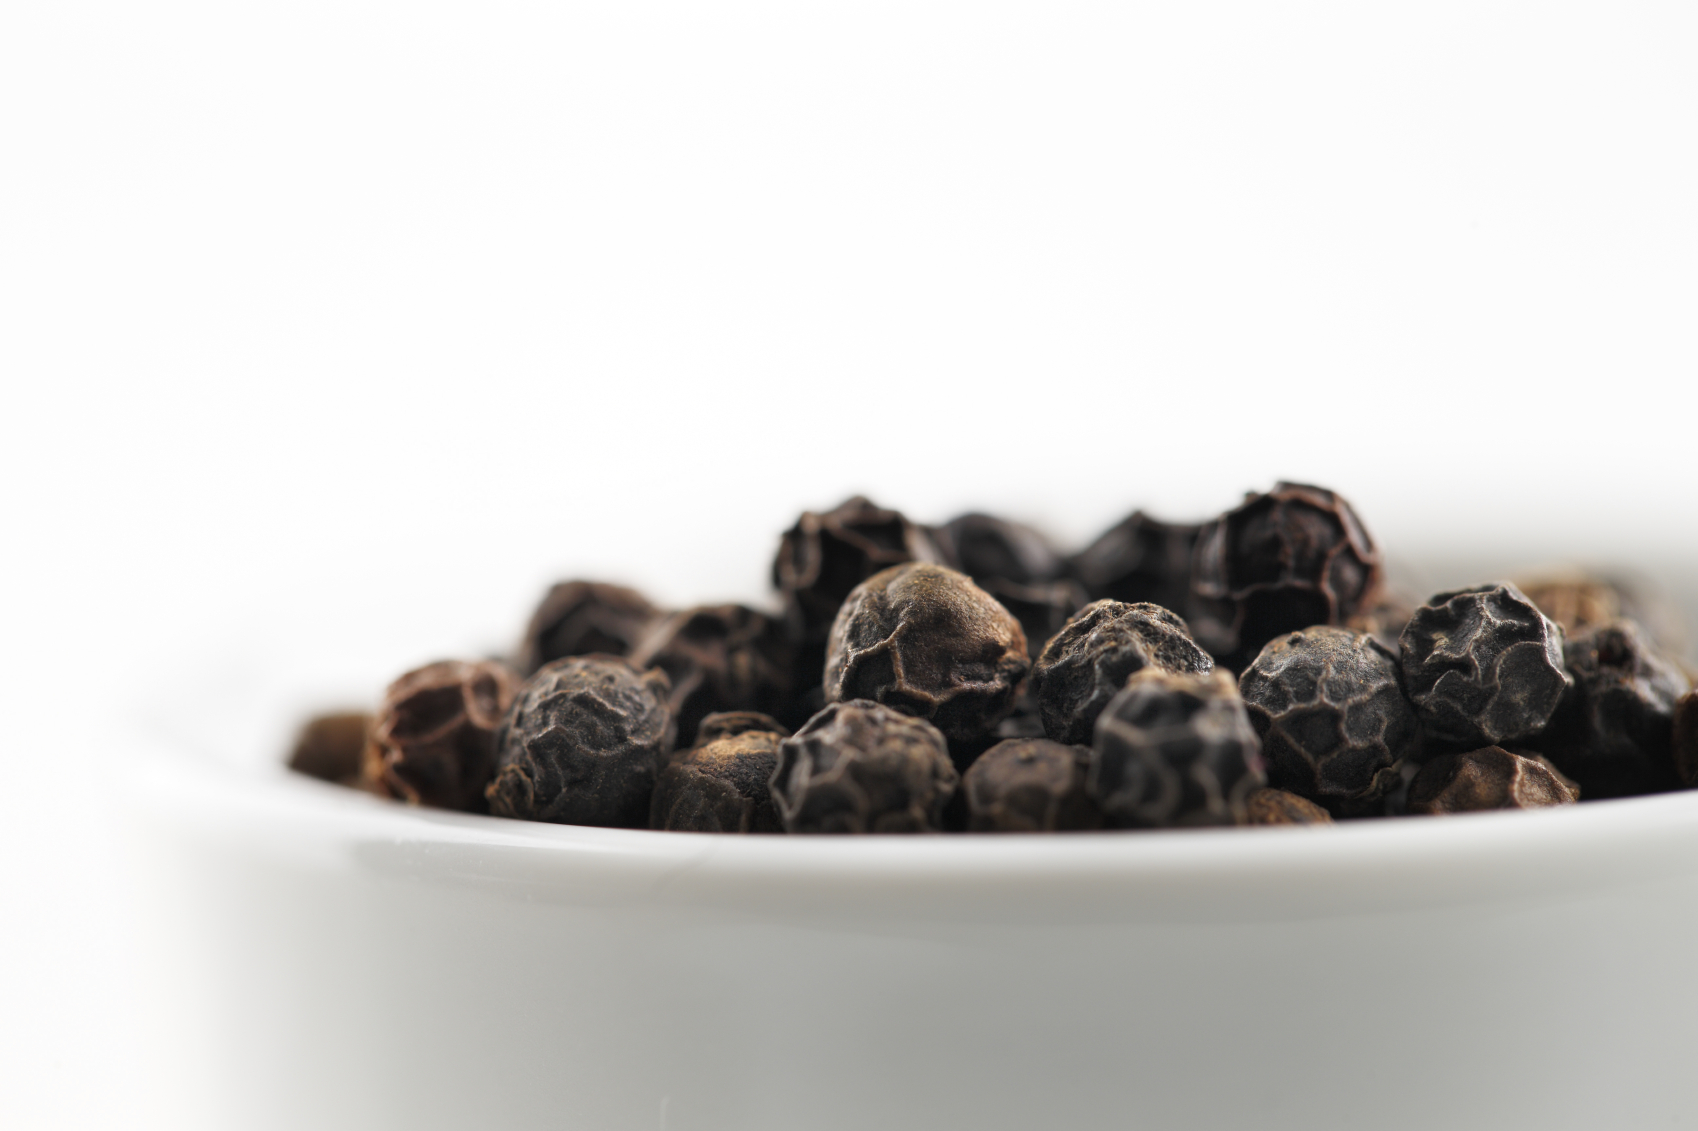 Here are 3 ways black pepper can help you shrink your belly—safely and naturally.